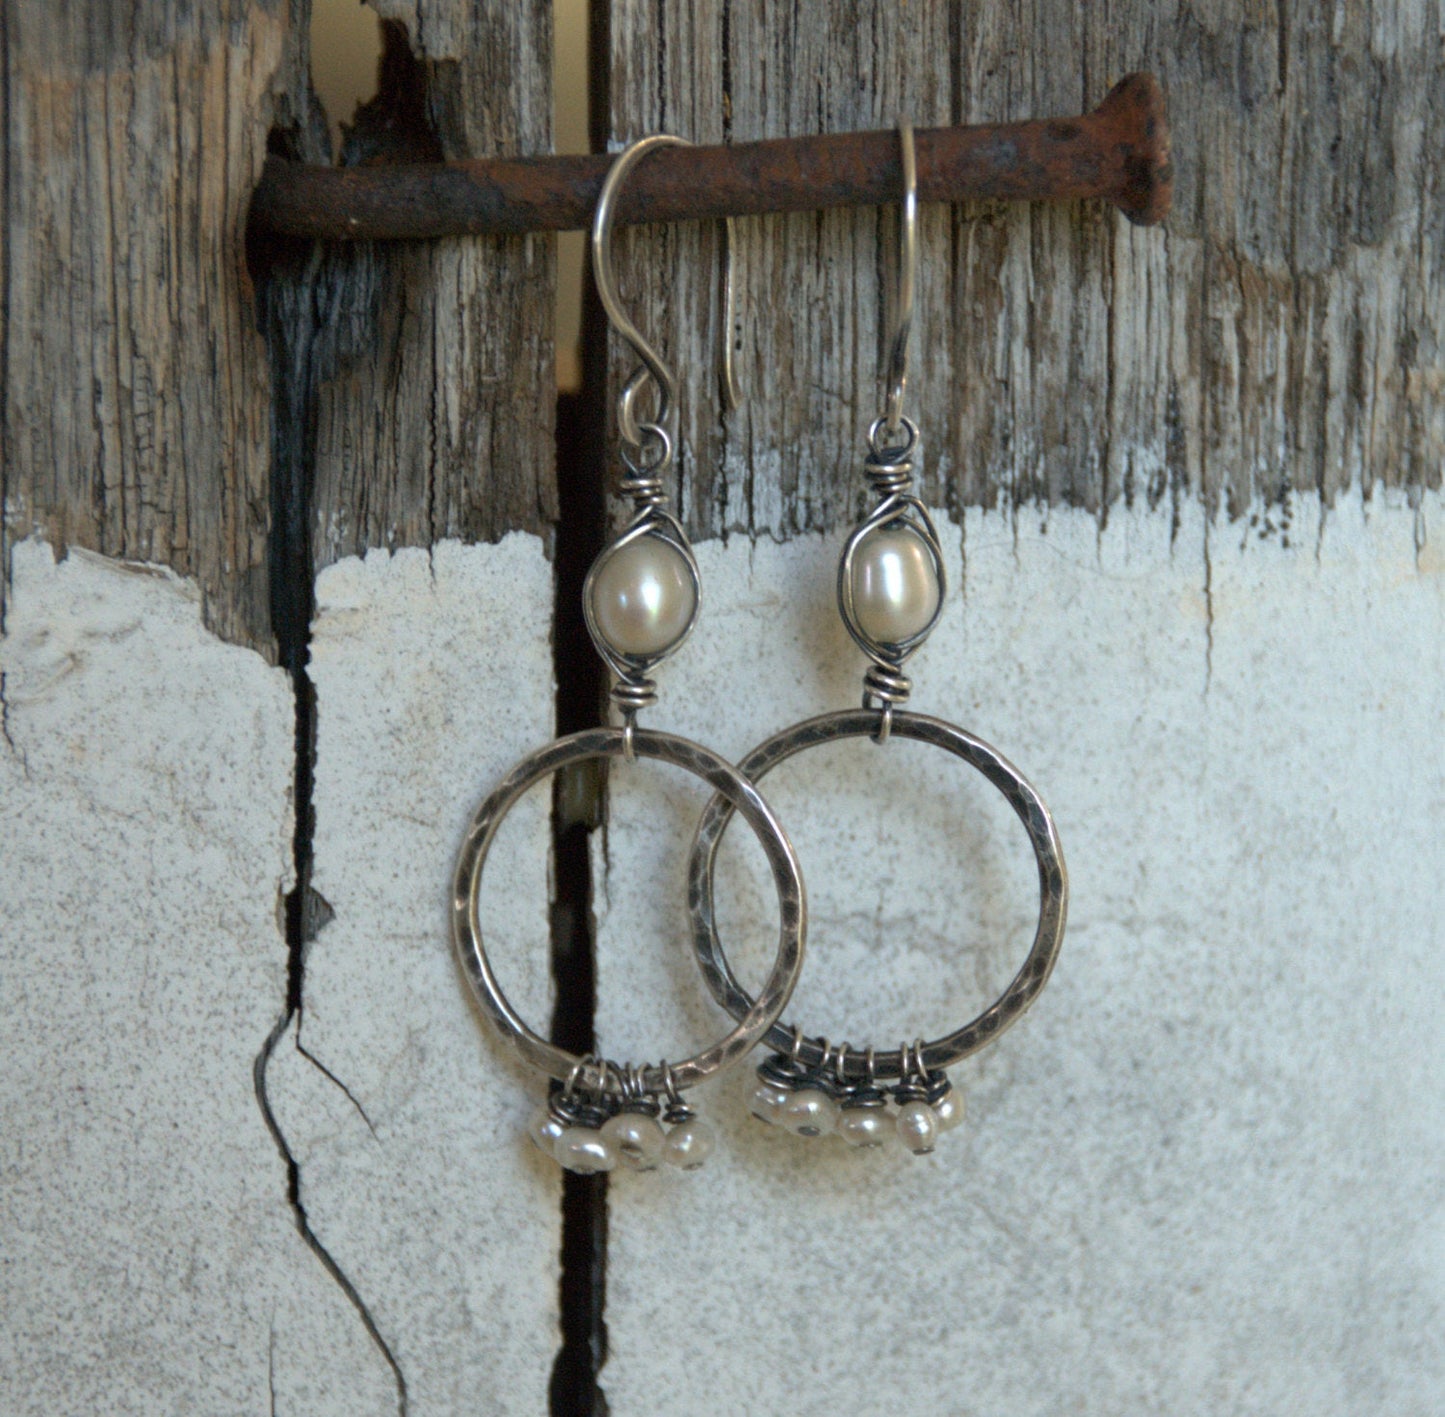 Mississippi Earrings - Freshwater pearls. Oxidized, hammered sterling silver. Handmade